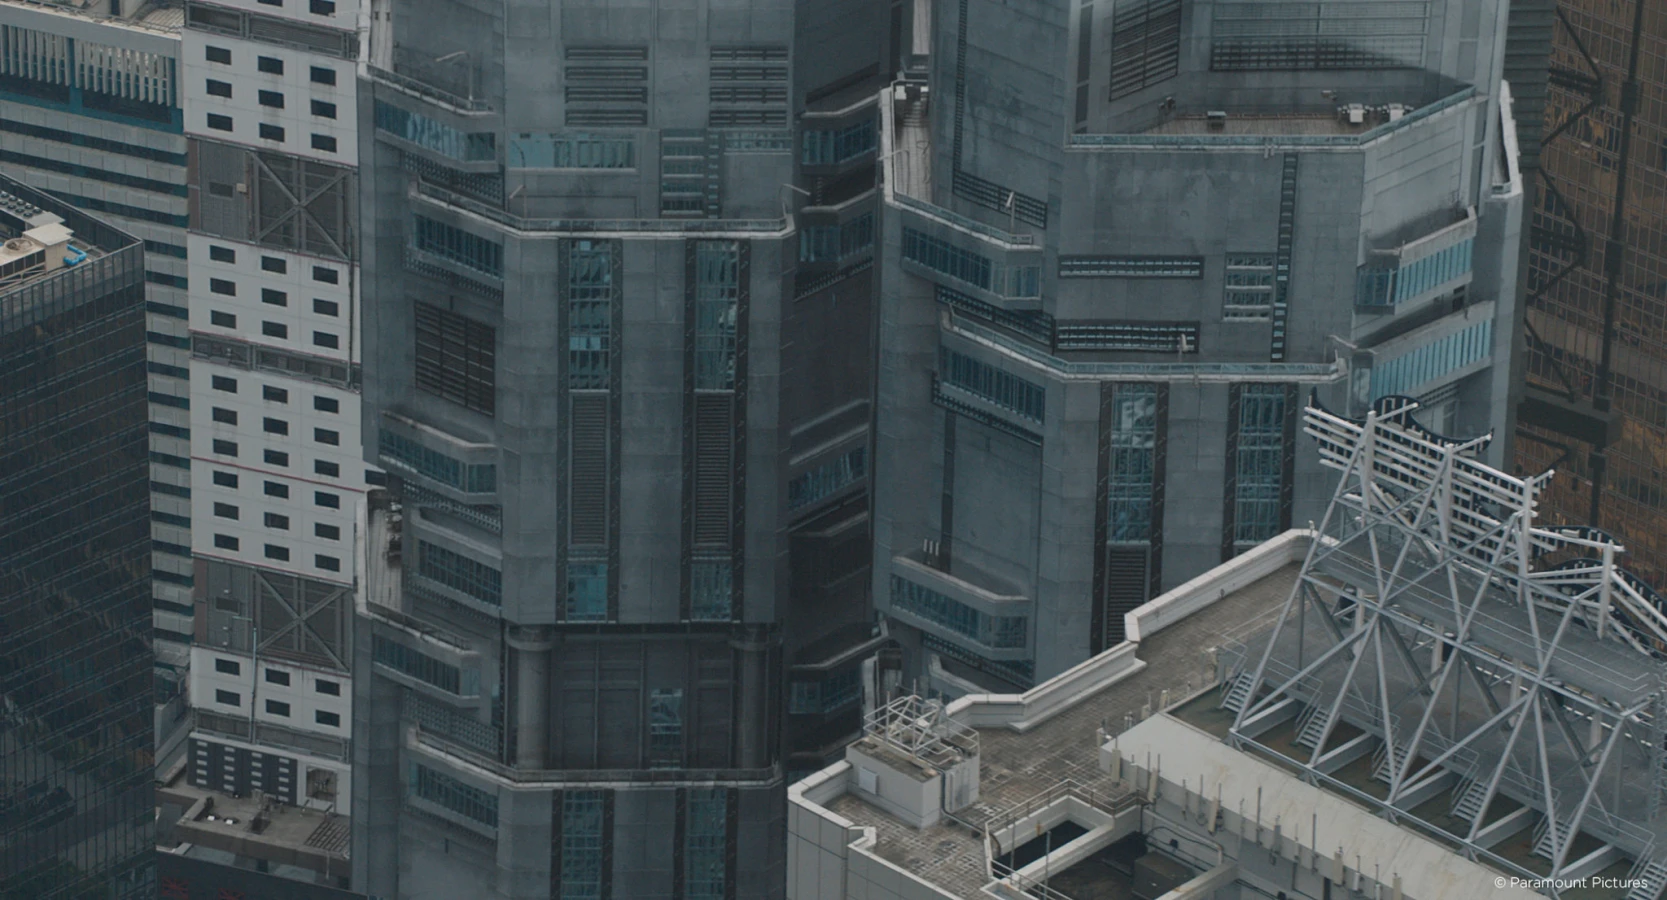  Ghost in the shell building shot from Raynault vfx 